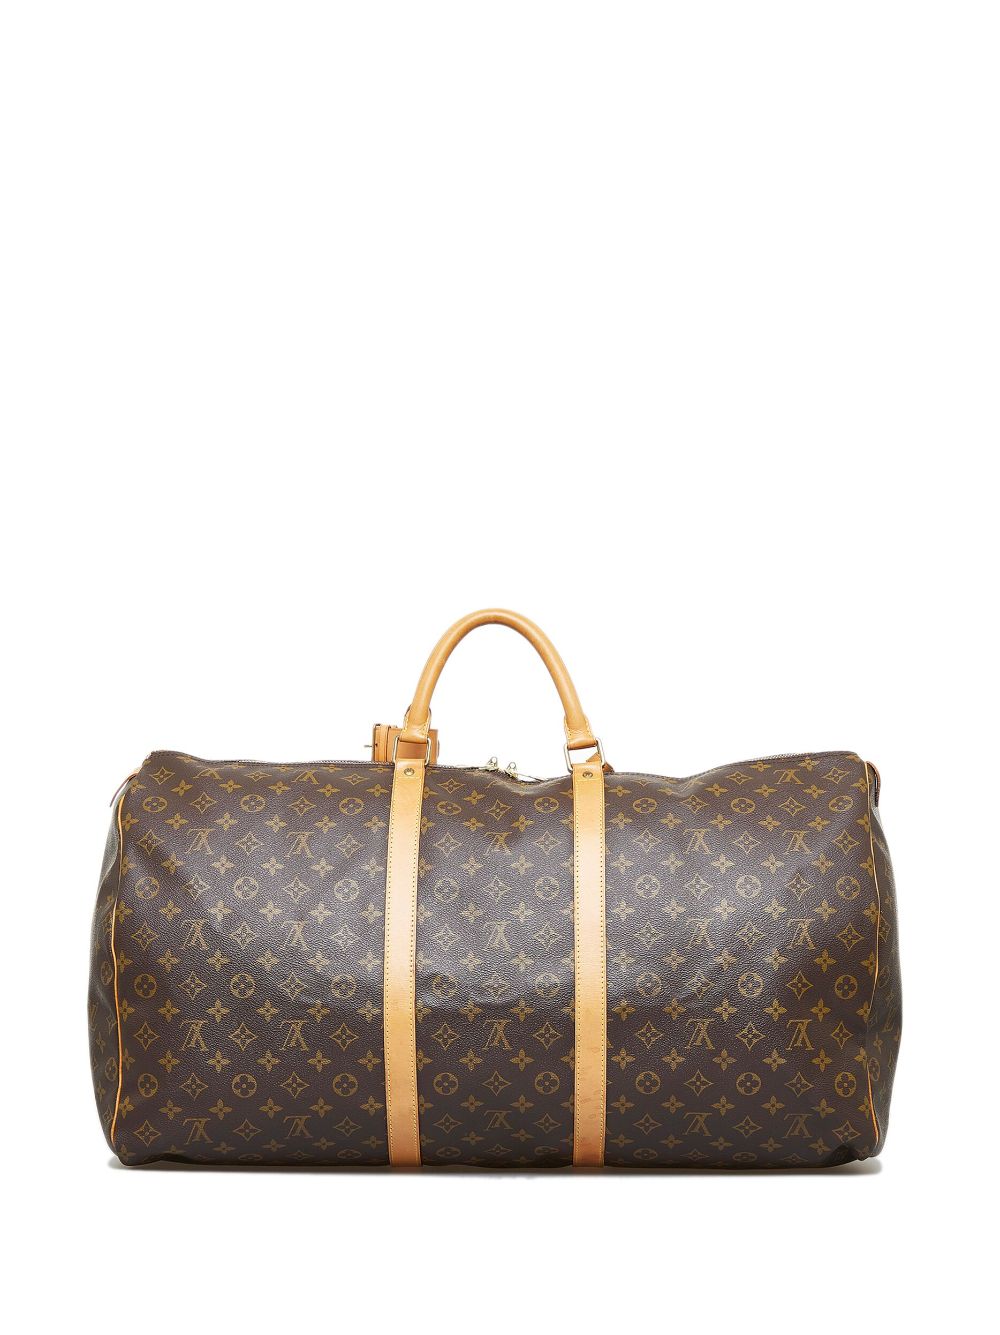 Top 6 Most Affordable Louis Vuitton Bags